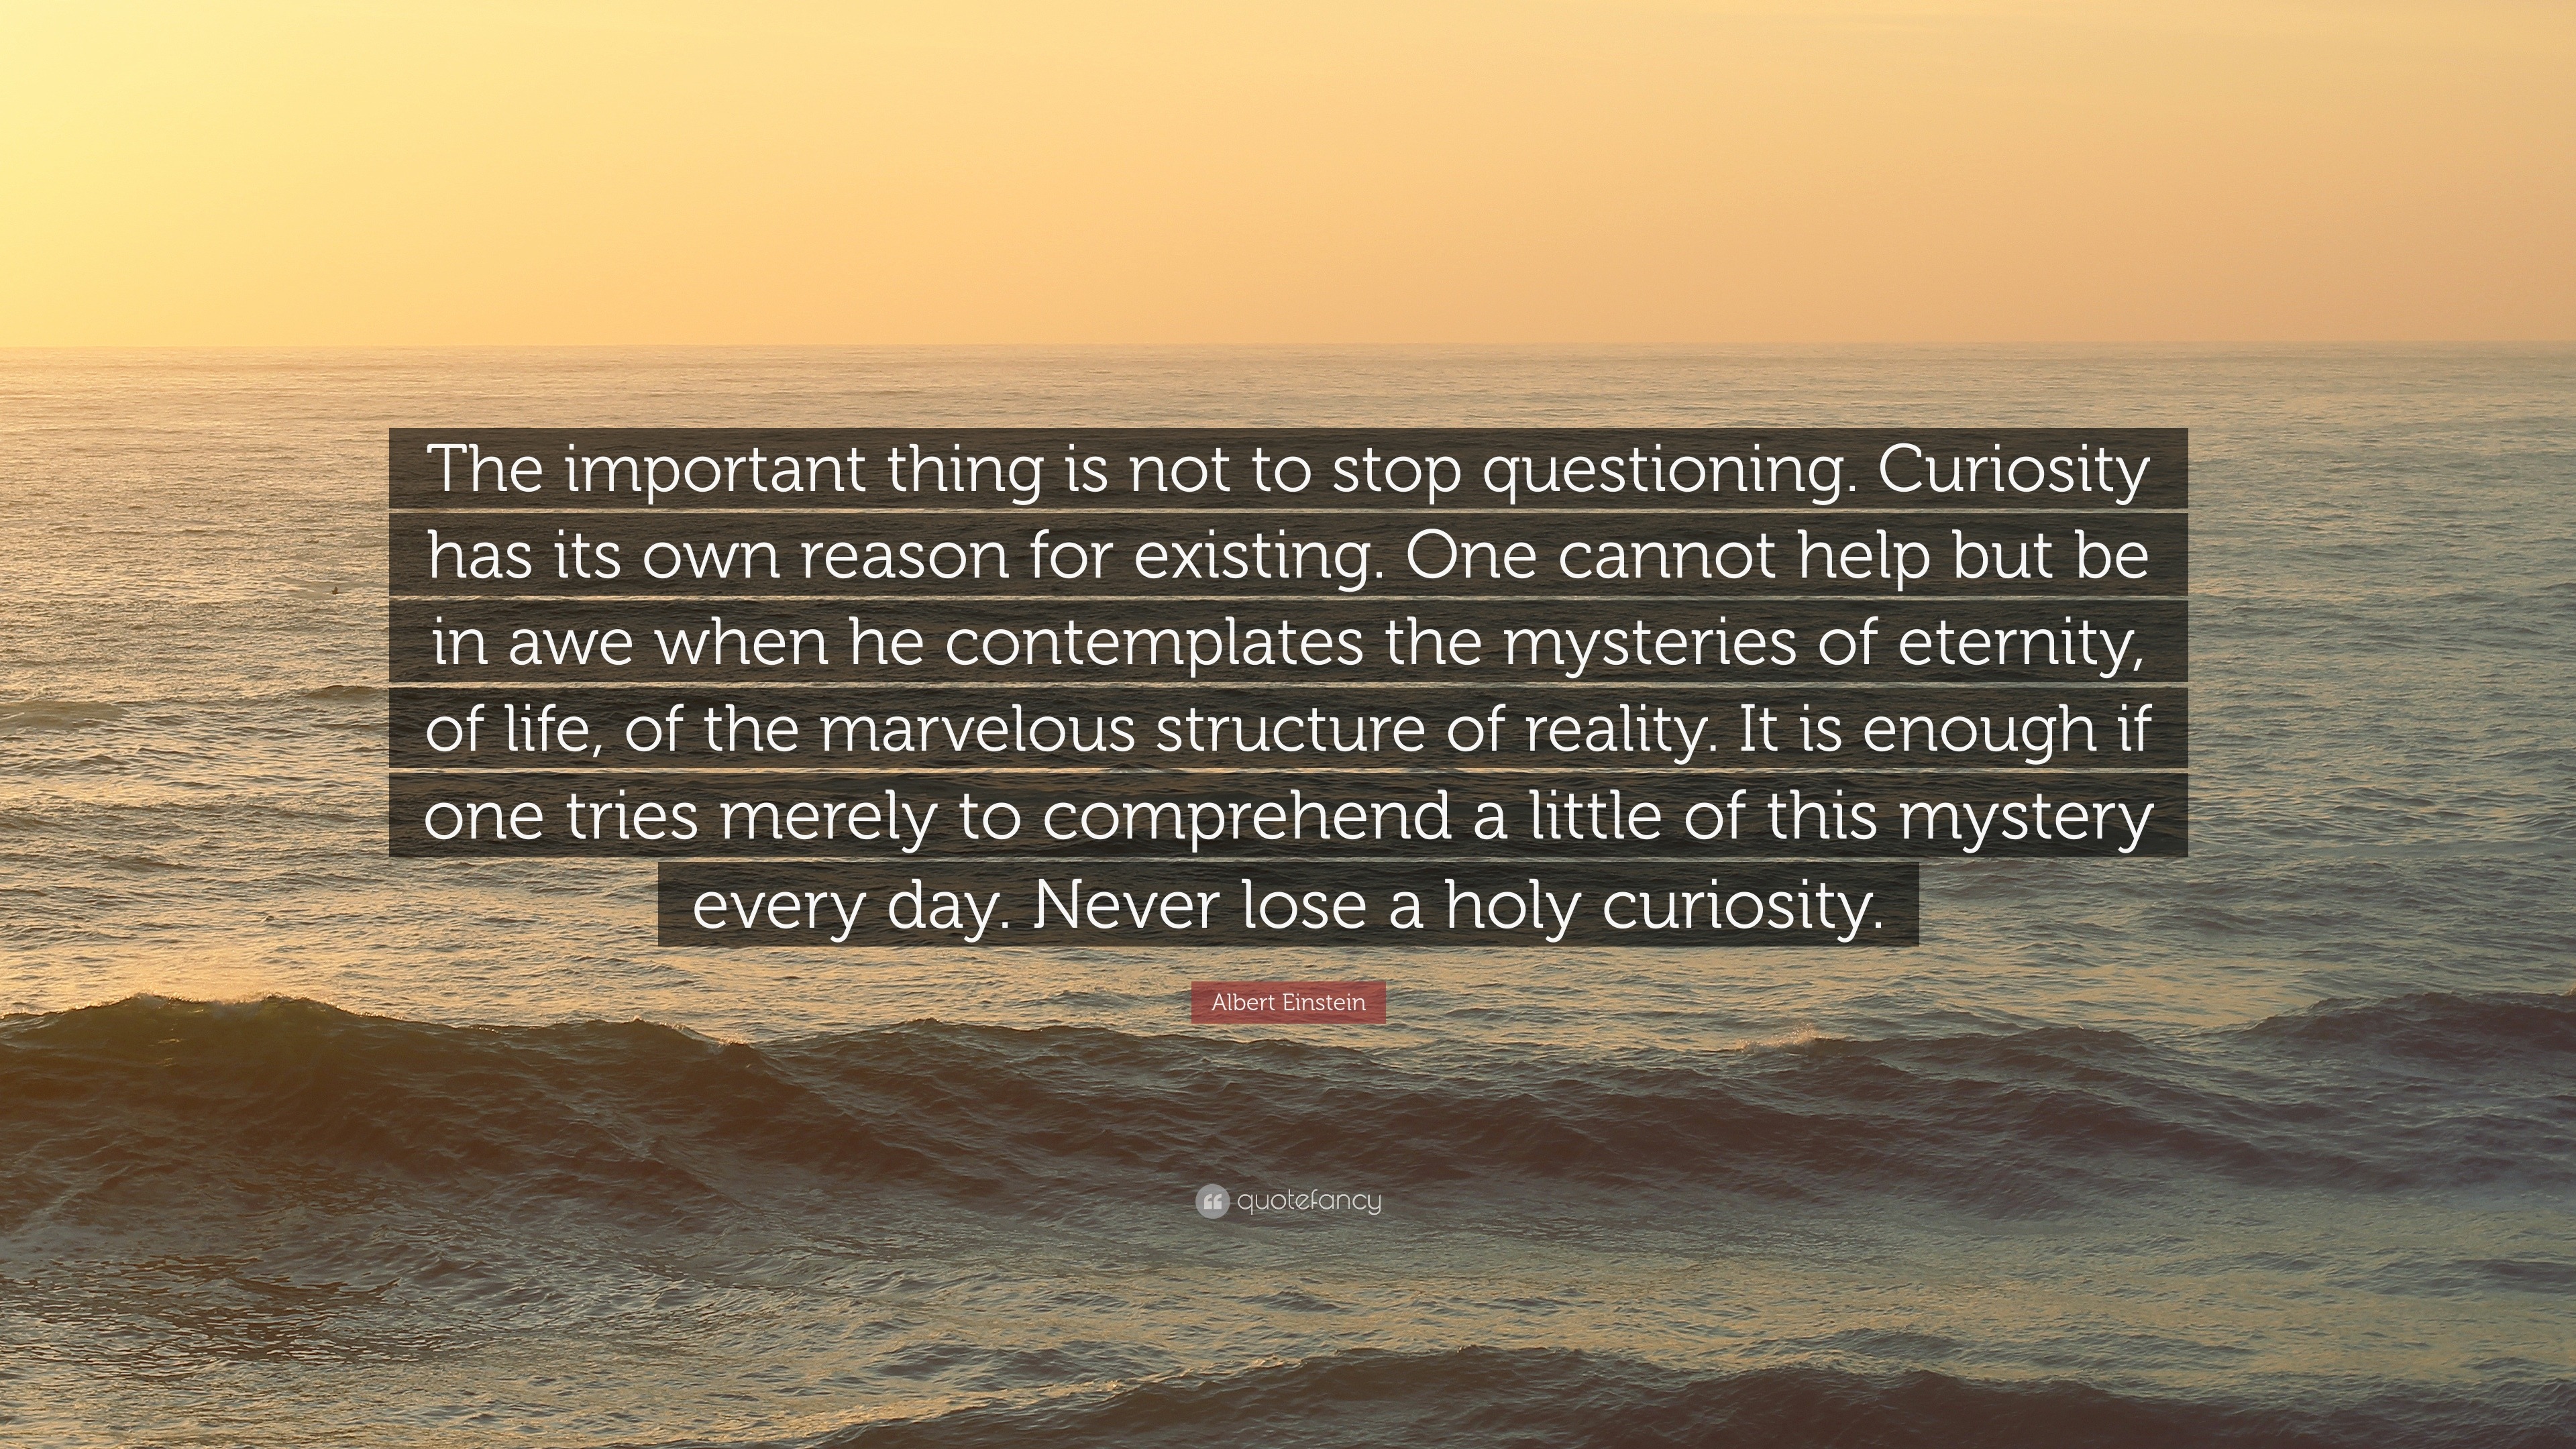 Albert Einstein Quote “The important thing is not to stop questioning Curiosity has